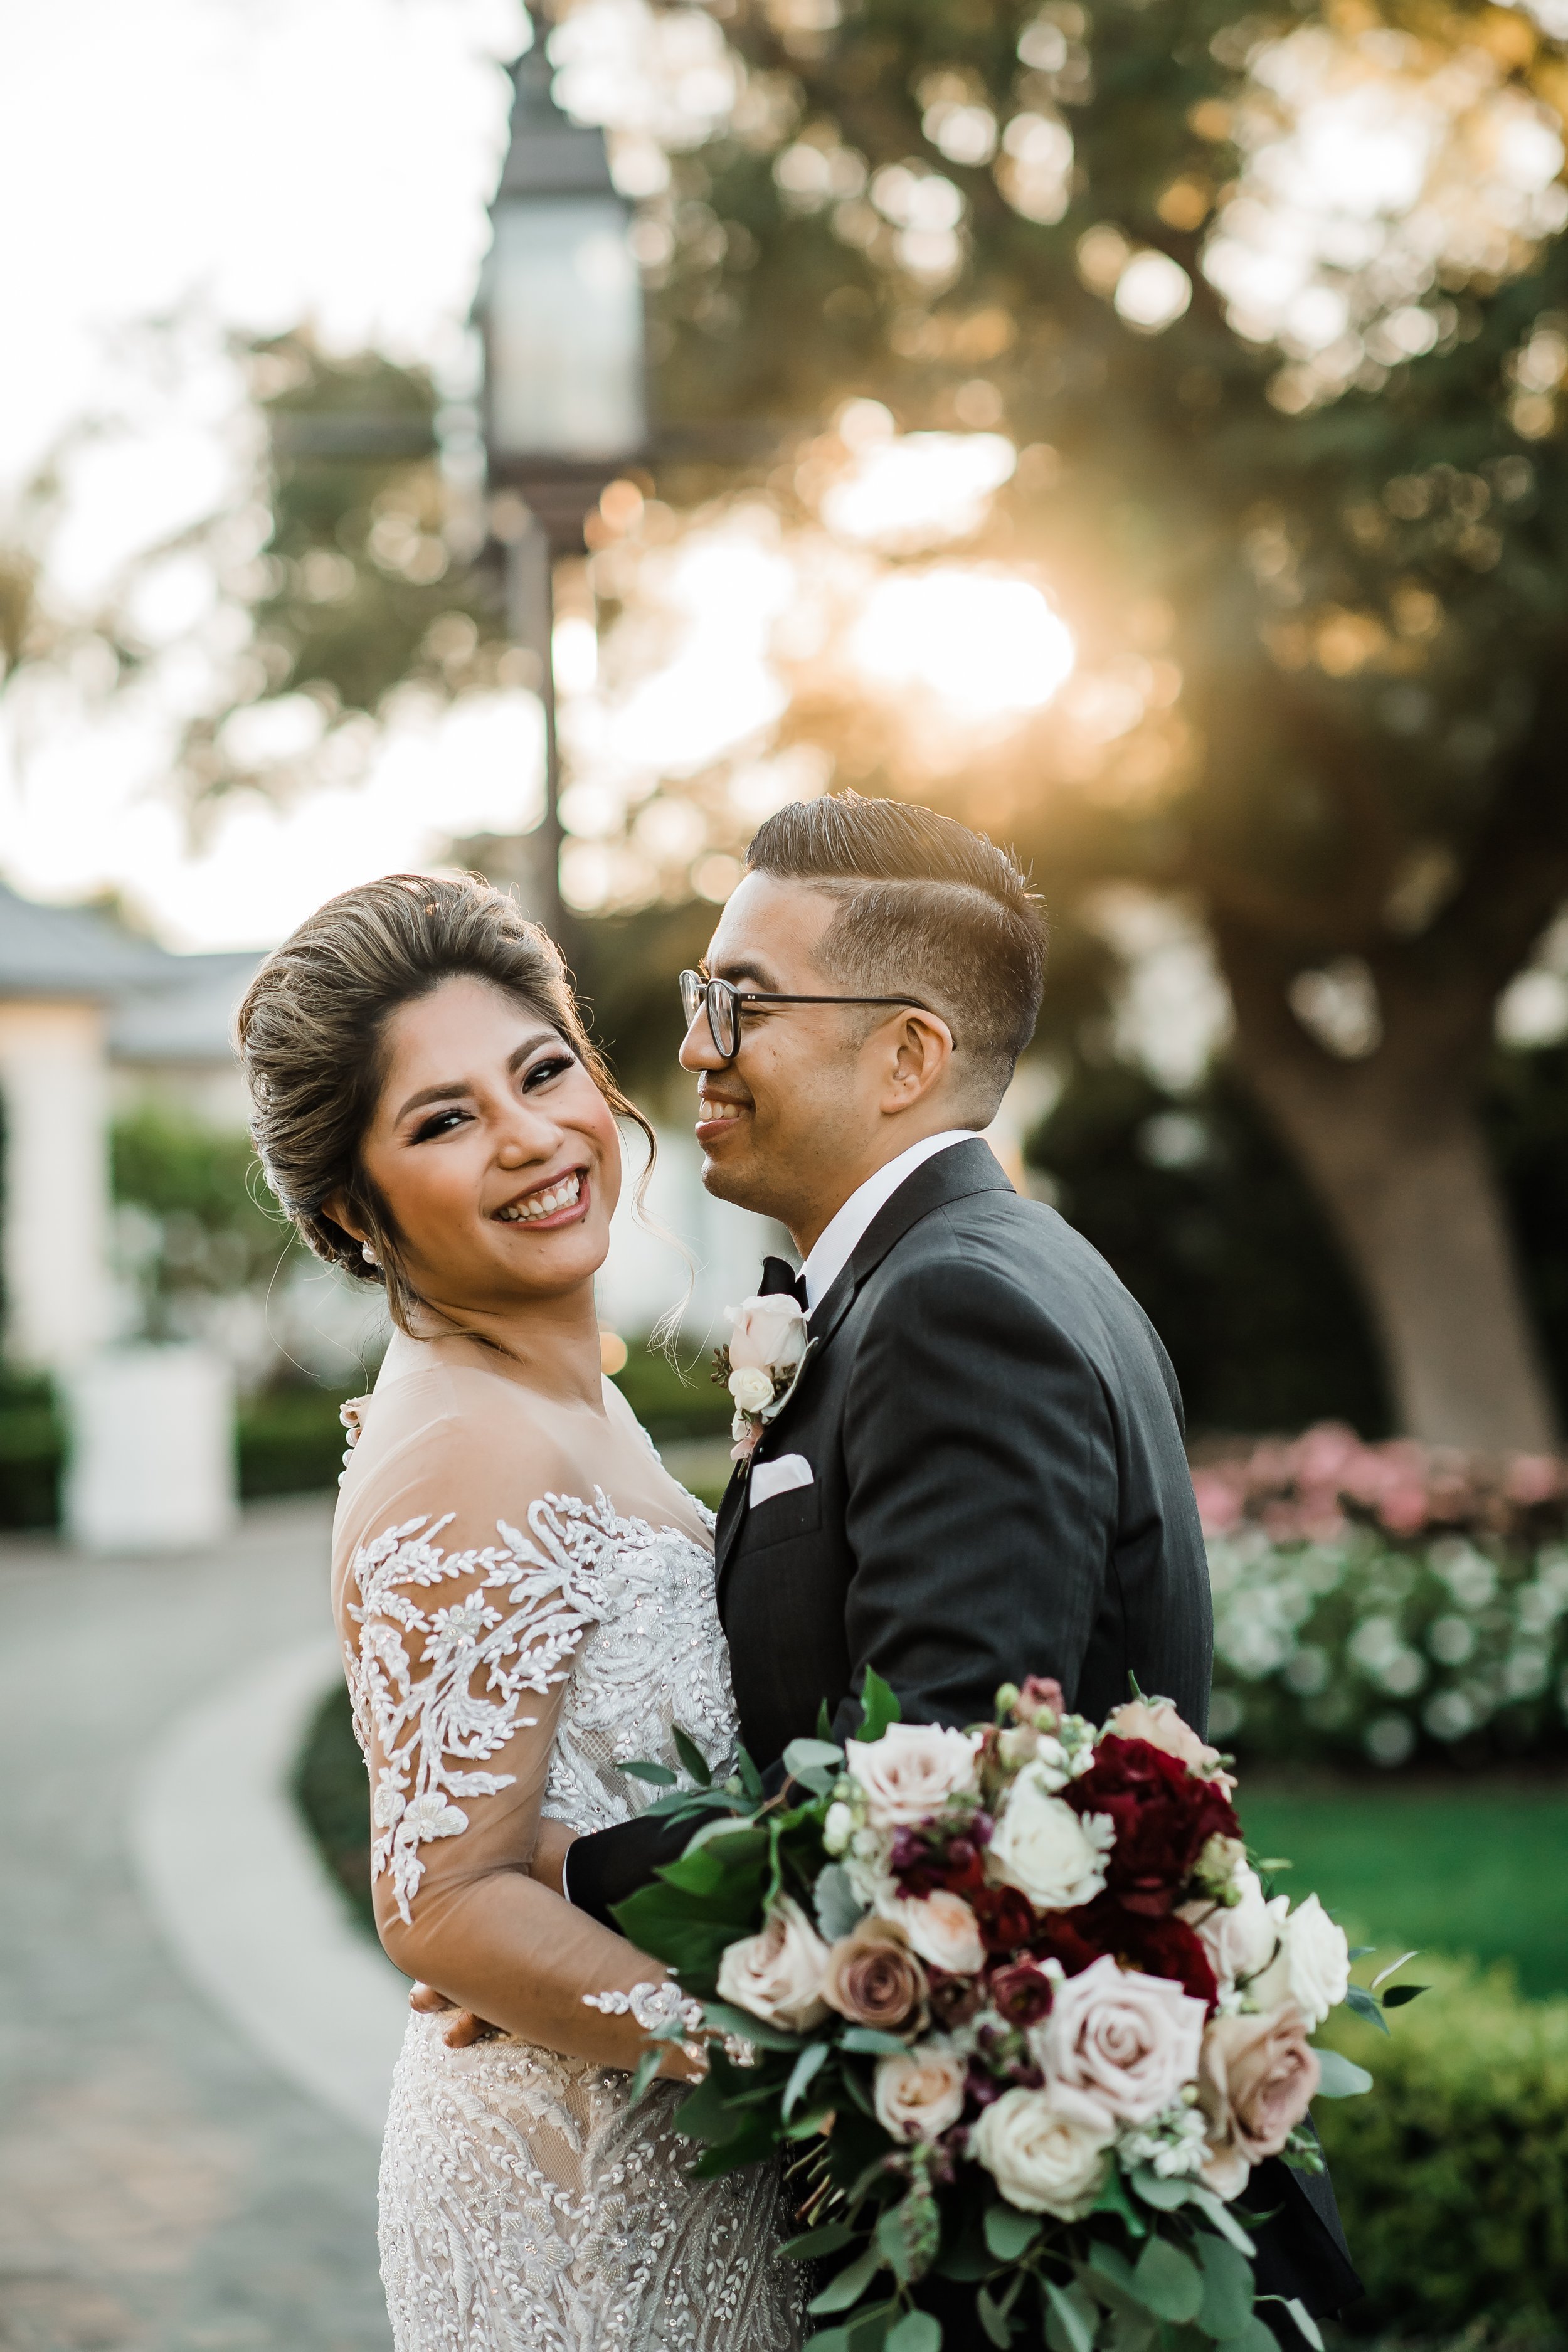 www.santabarbarawedding.com | Rosewood Miramar | Events by Maxi | Michelle Ramirez | Tangled Lotus | Bride and Groom Embrace Outside